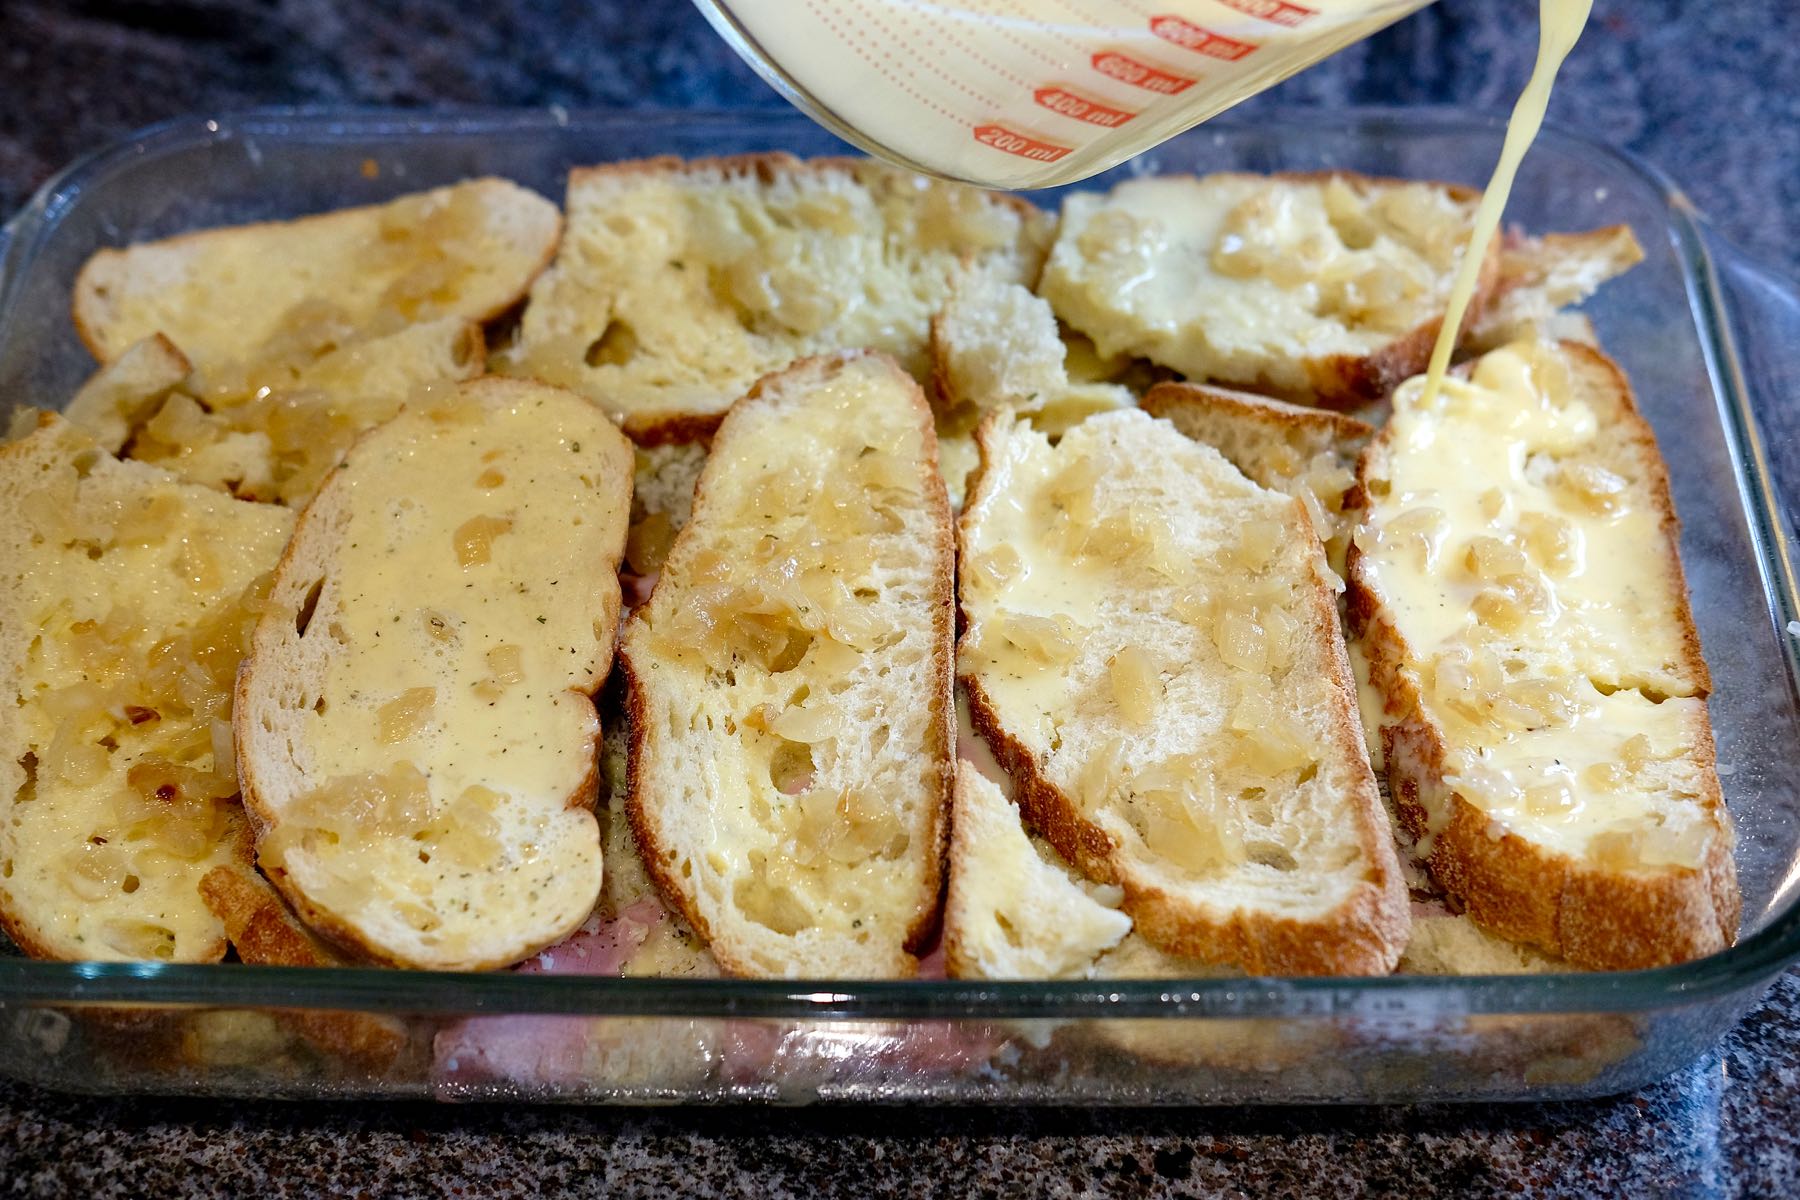 Layers of bread, ham and cheese  in glass baking dish while custard is being poured over.